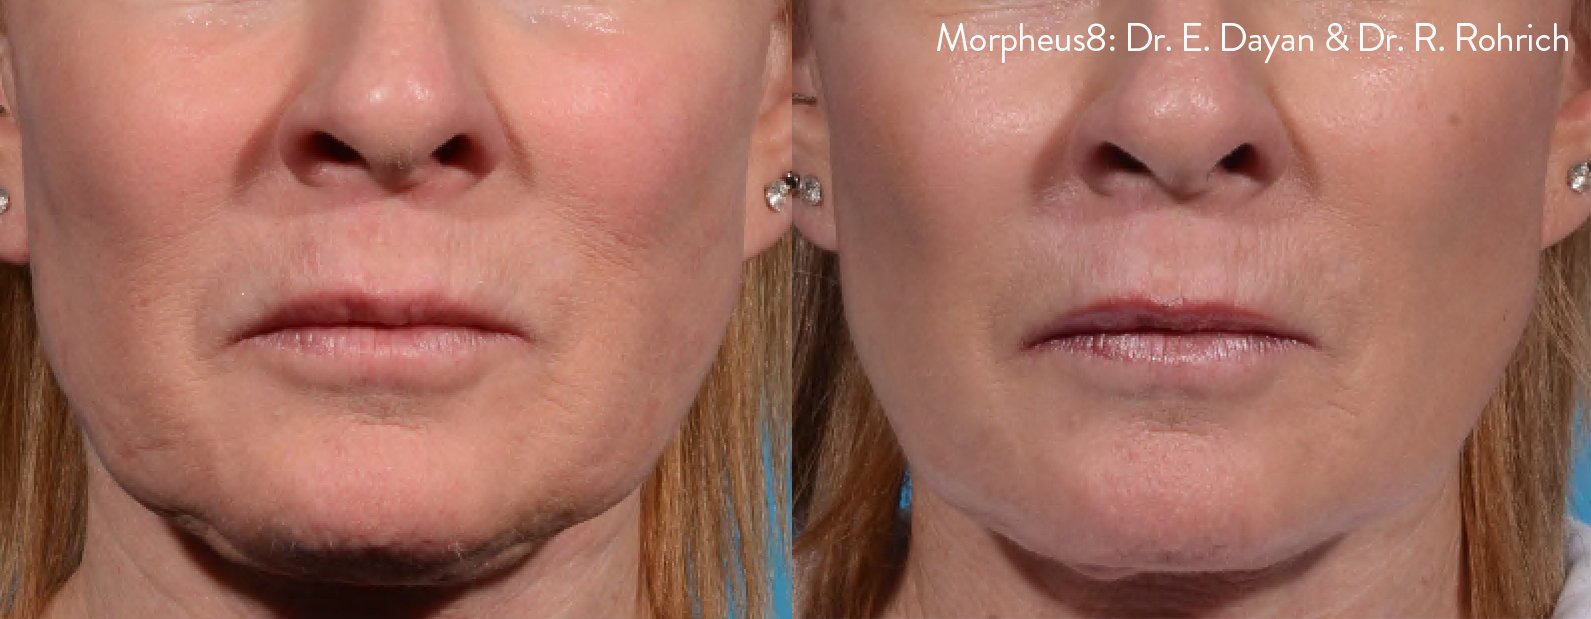 morpheus8-before-after-dr-e-dayan-dr-r-rohrich-preview-2.jpg